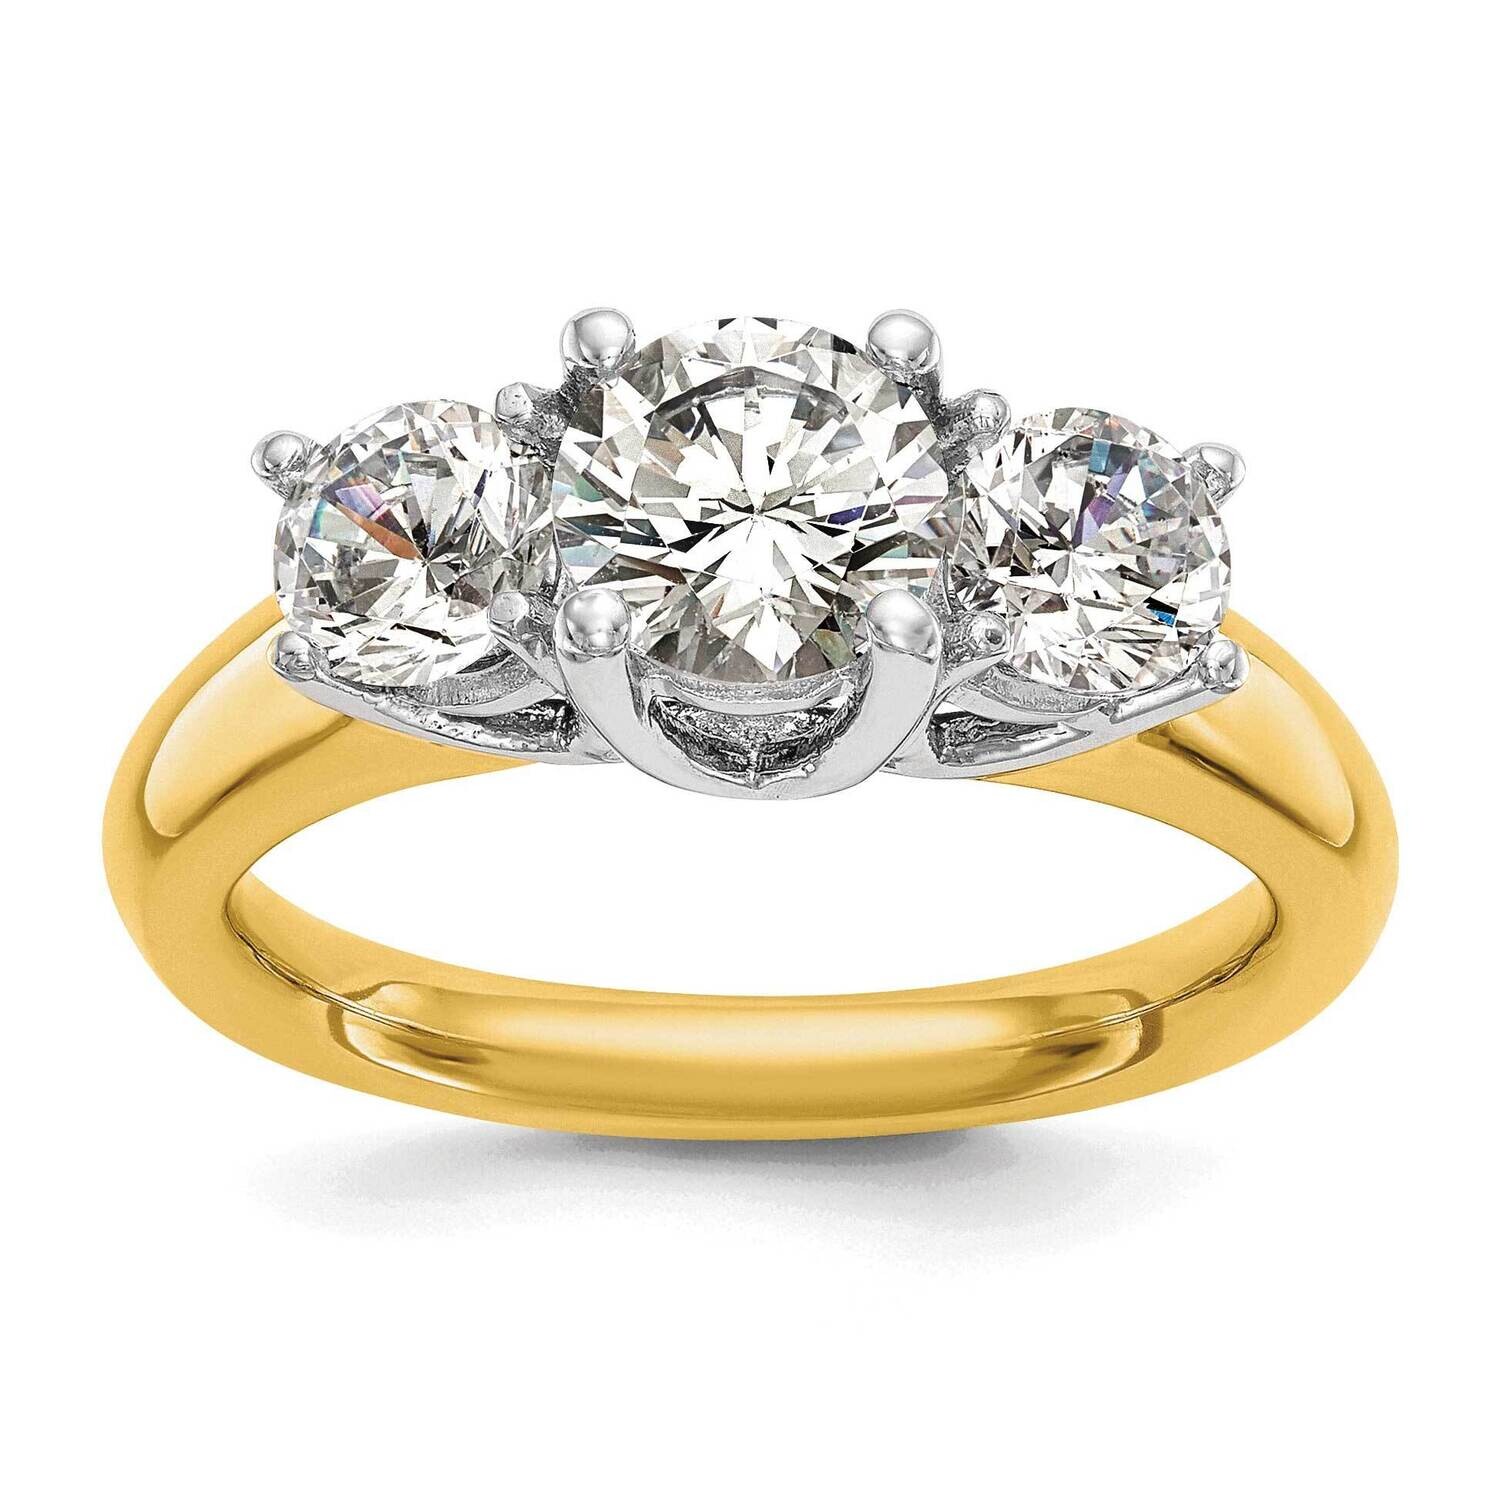 3-Stone Holds 1 Carat 6.5mm Round Center 2-5.2mm Round Sides Engagement Ring Mounting 14k Two-Tone Gold RM2946E-100-CYWAA